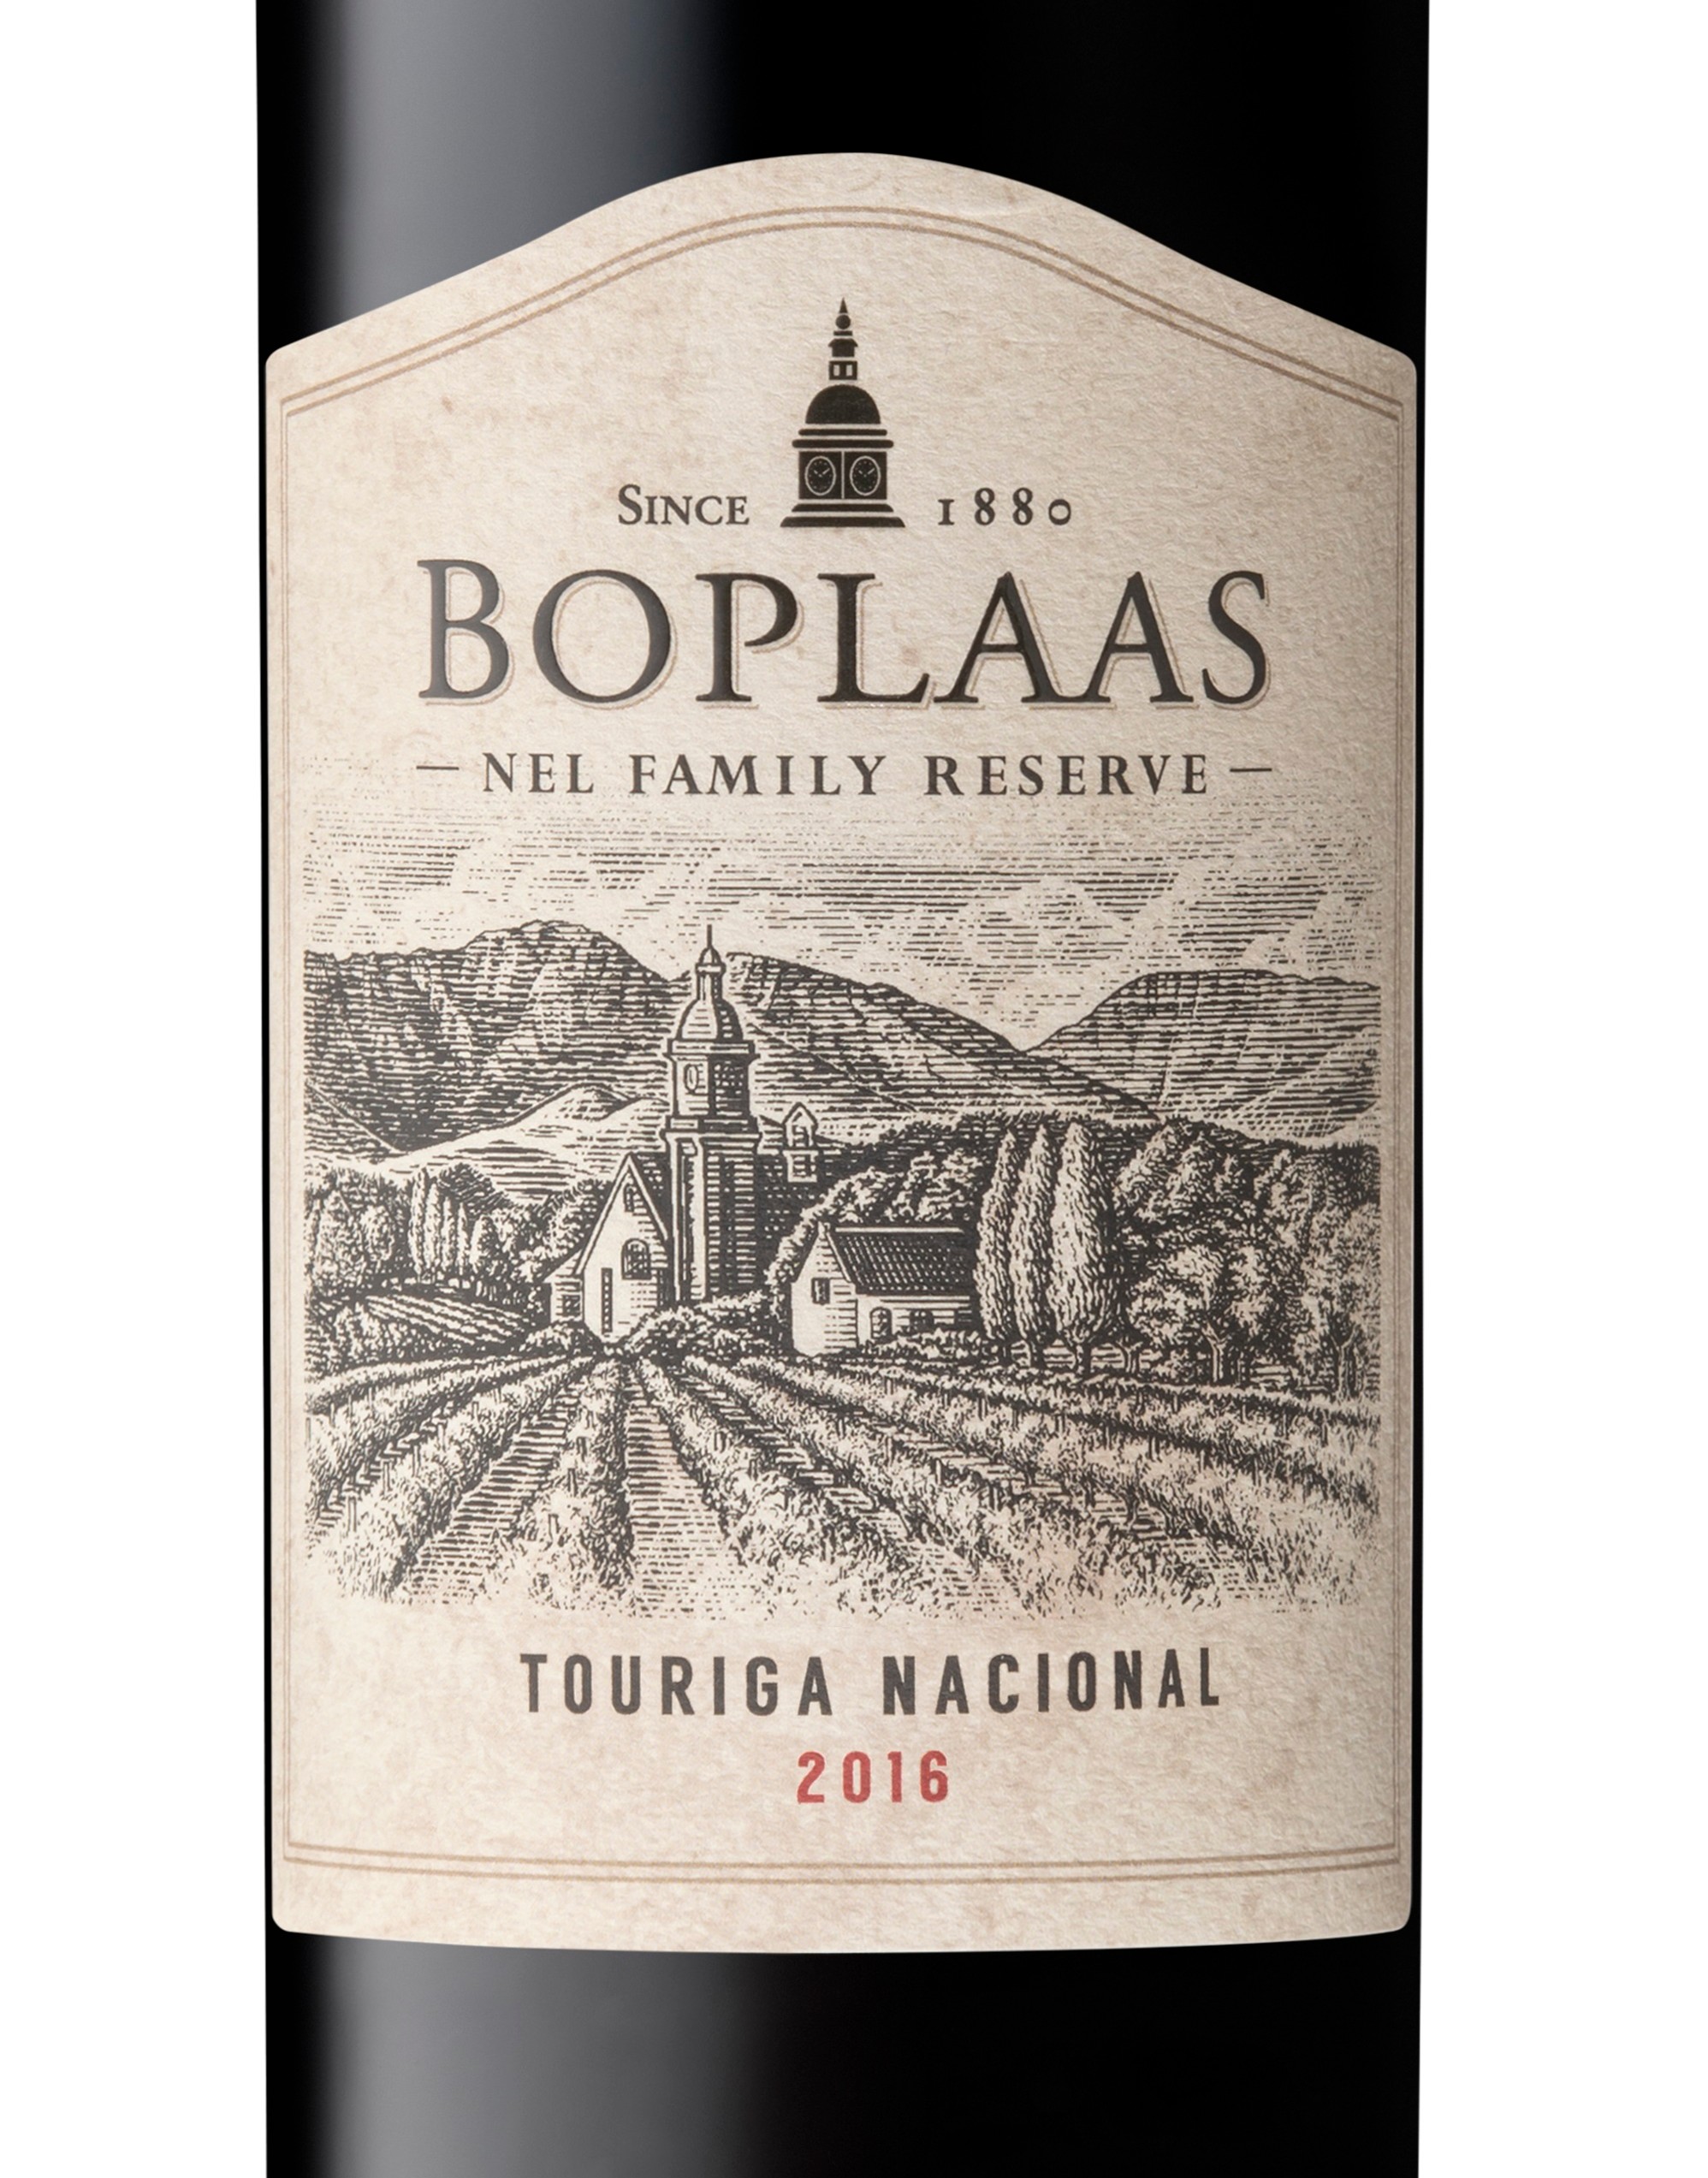 Boplaas Family Reserve Wines Get A New Look photo